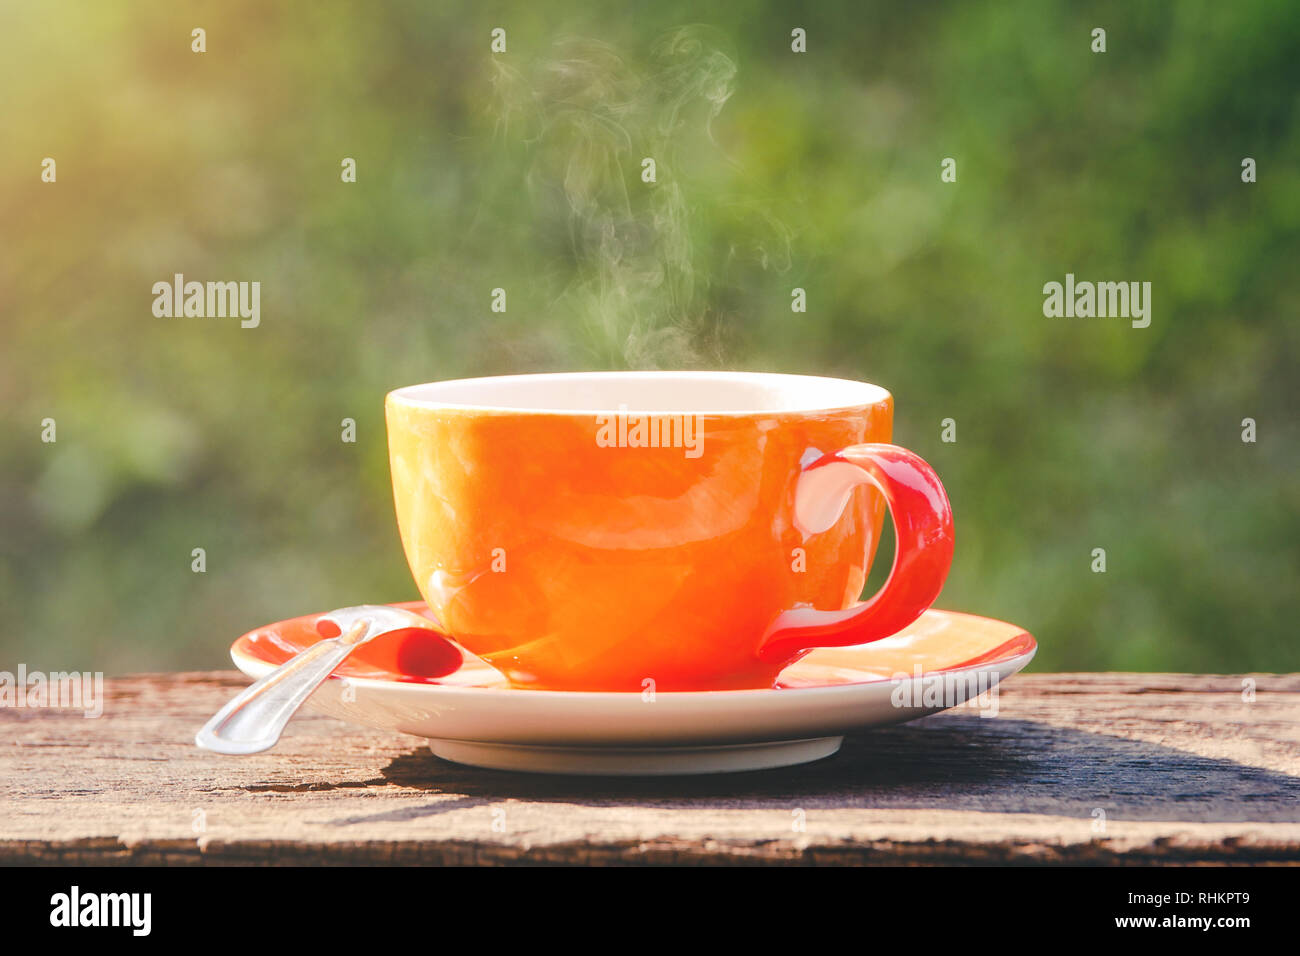 hot coffee cup refresh morning time on natural green background Stock Photo